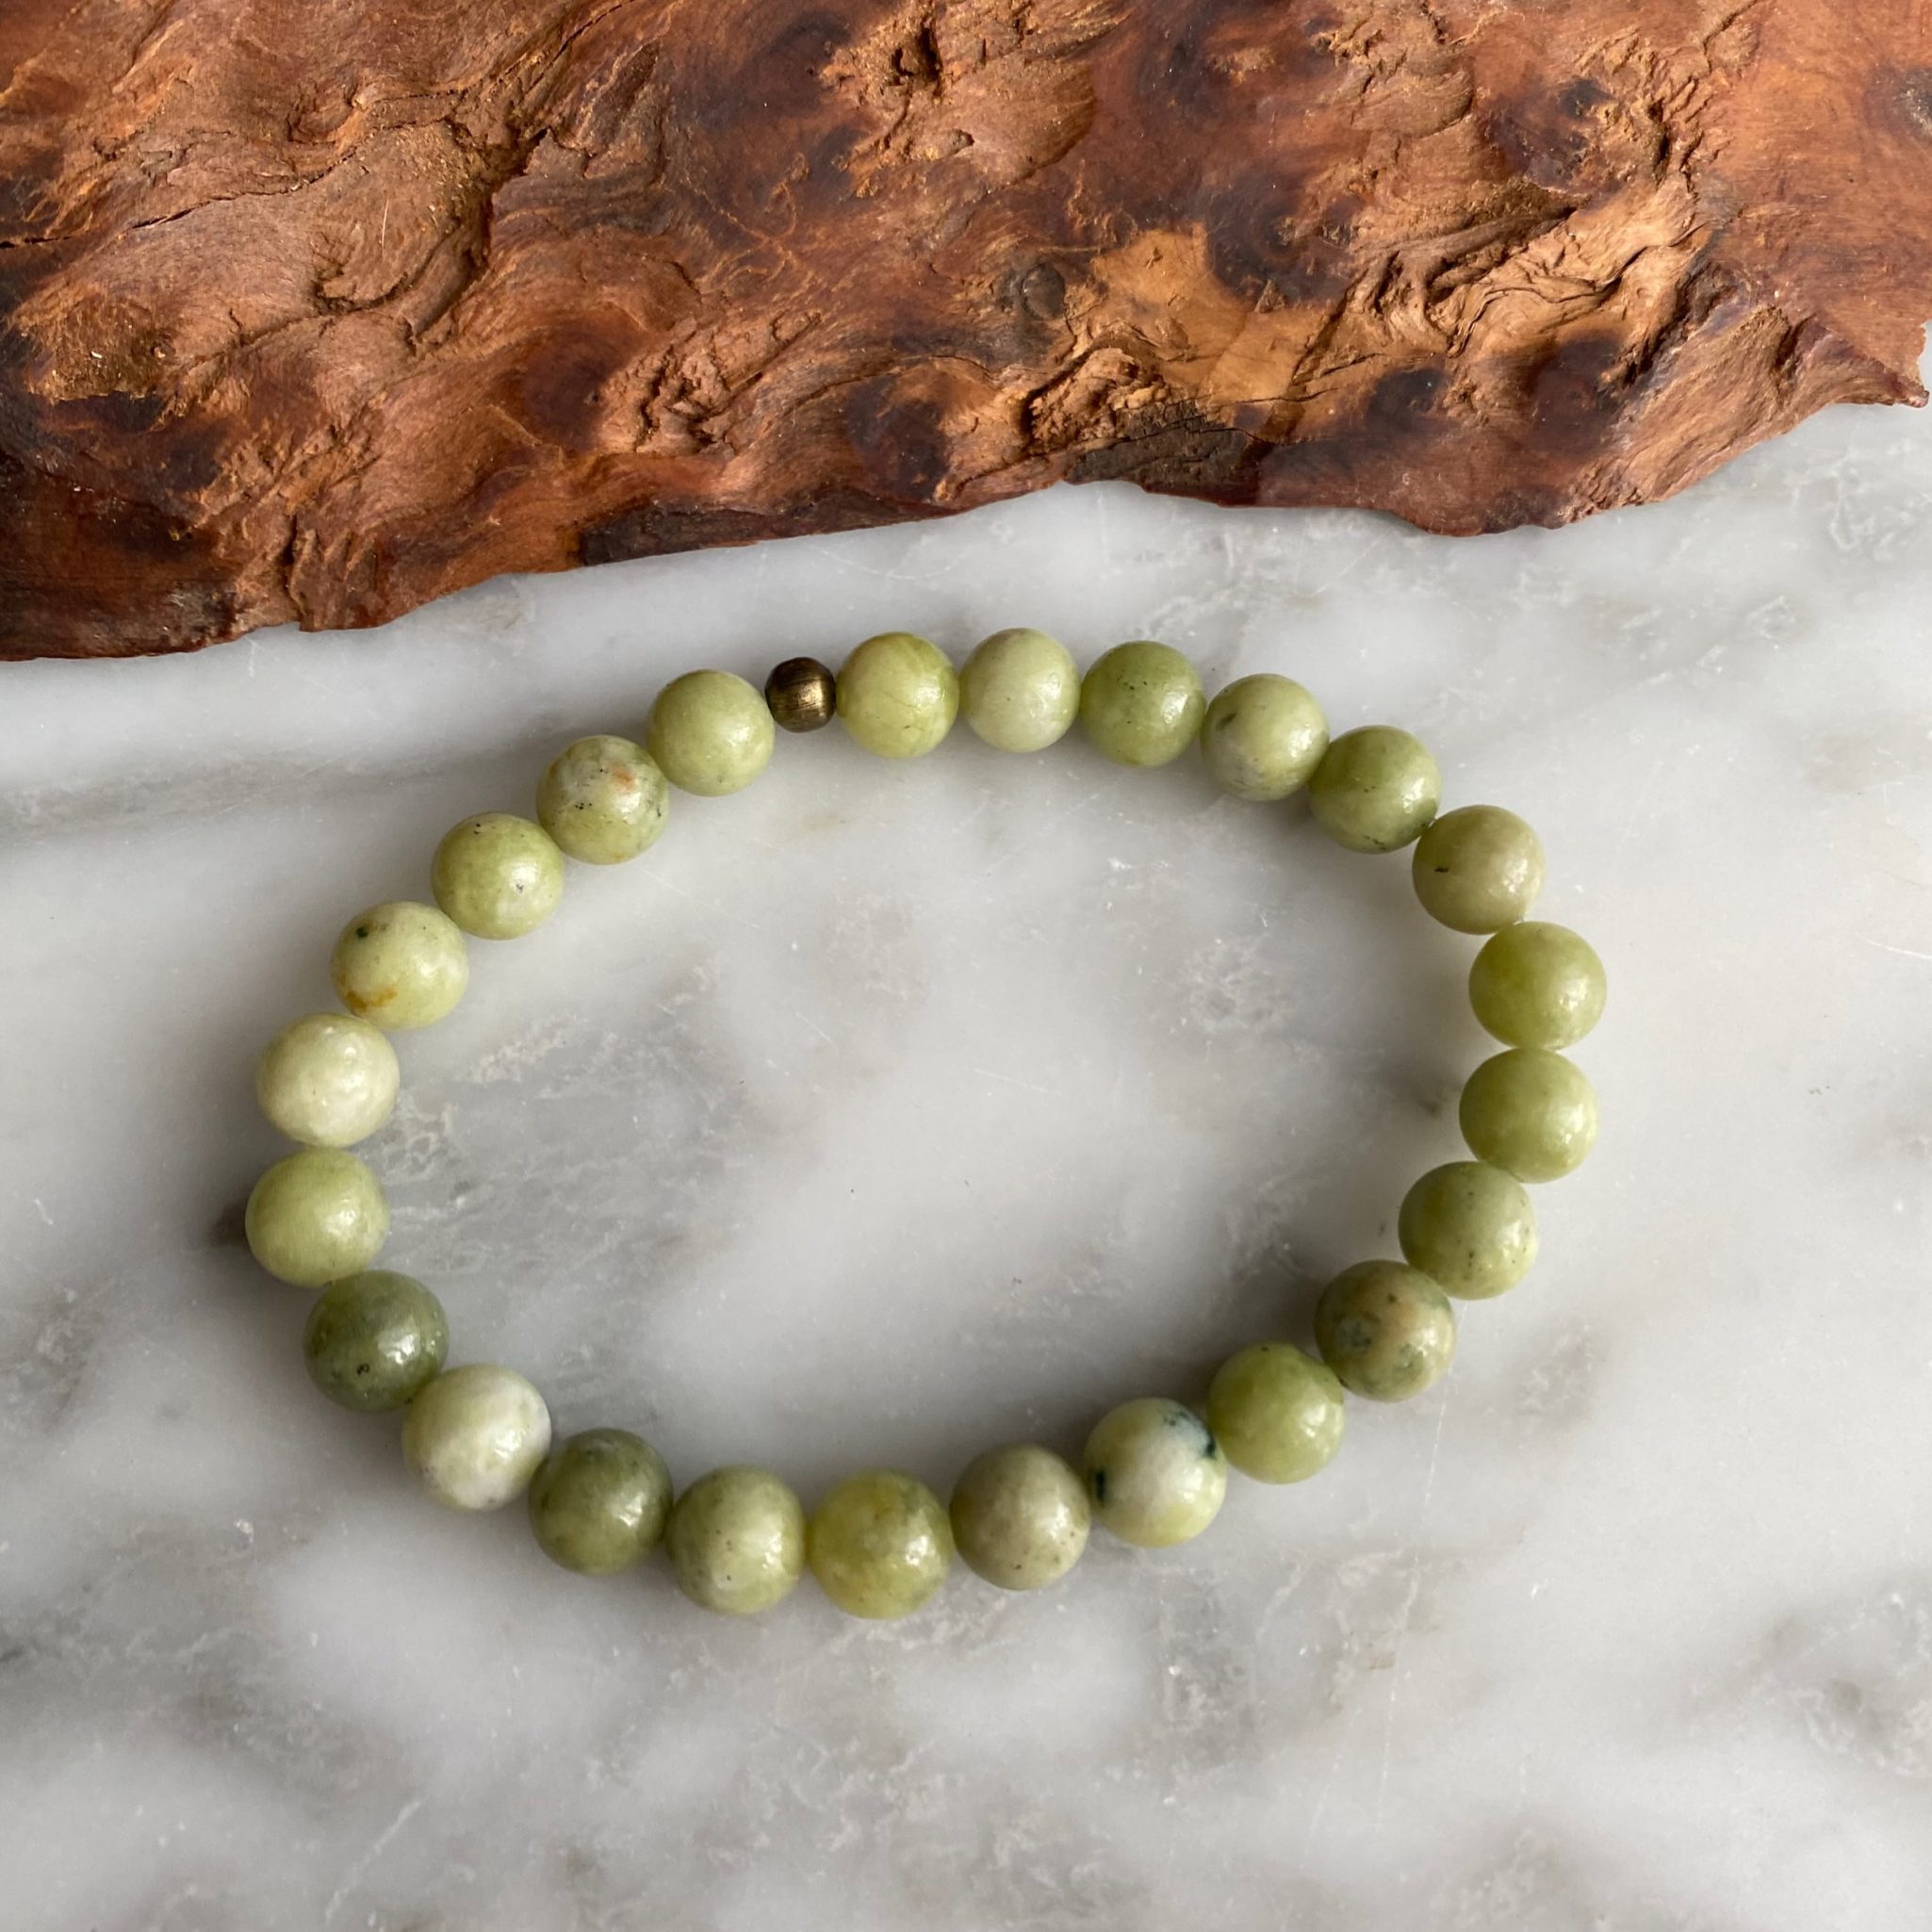 Serpentine Bead Bracelet | Wisdom, Past Life memories, Intuition – The  Lilith store